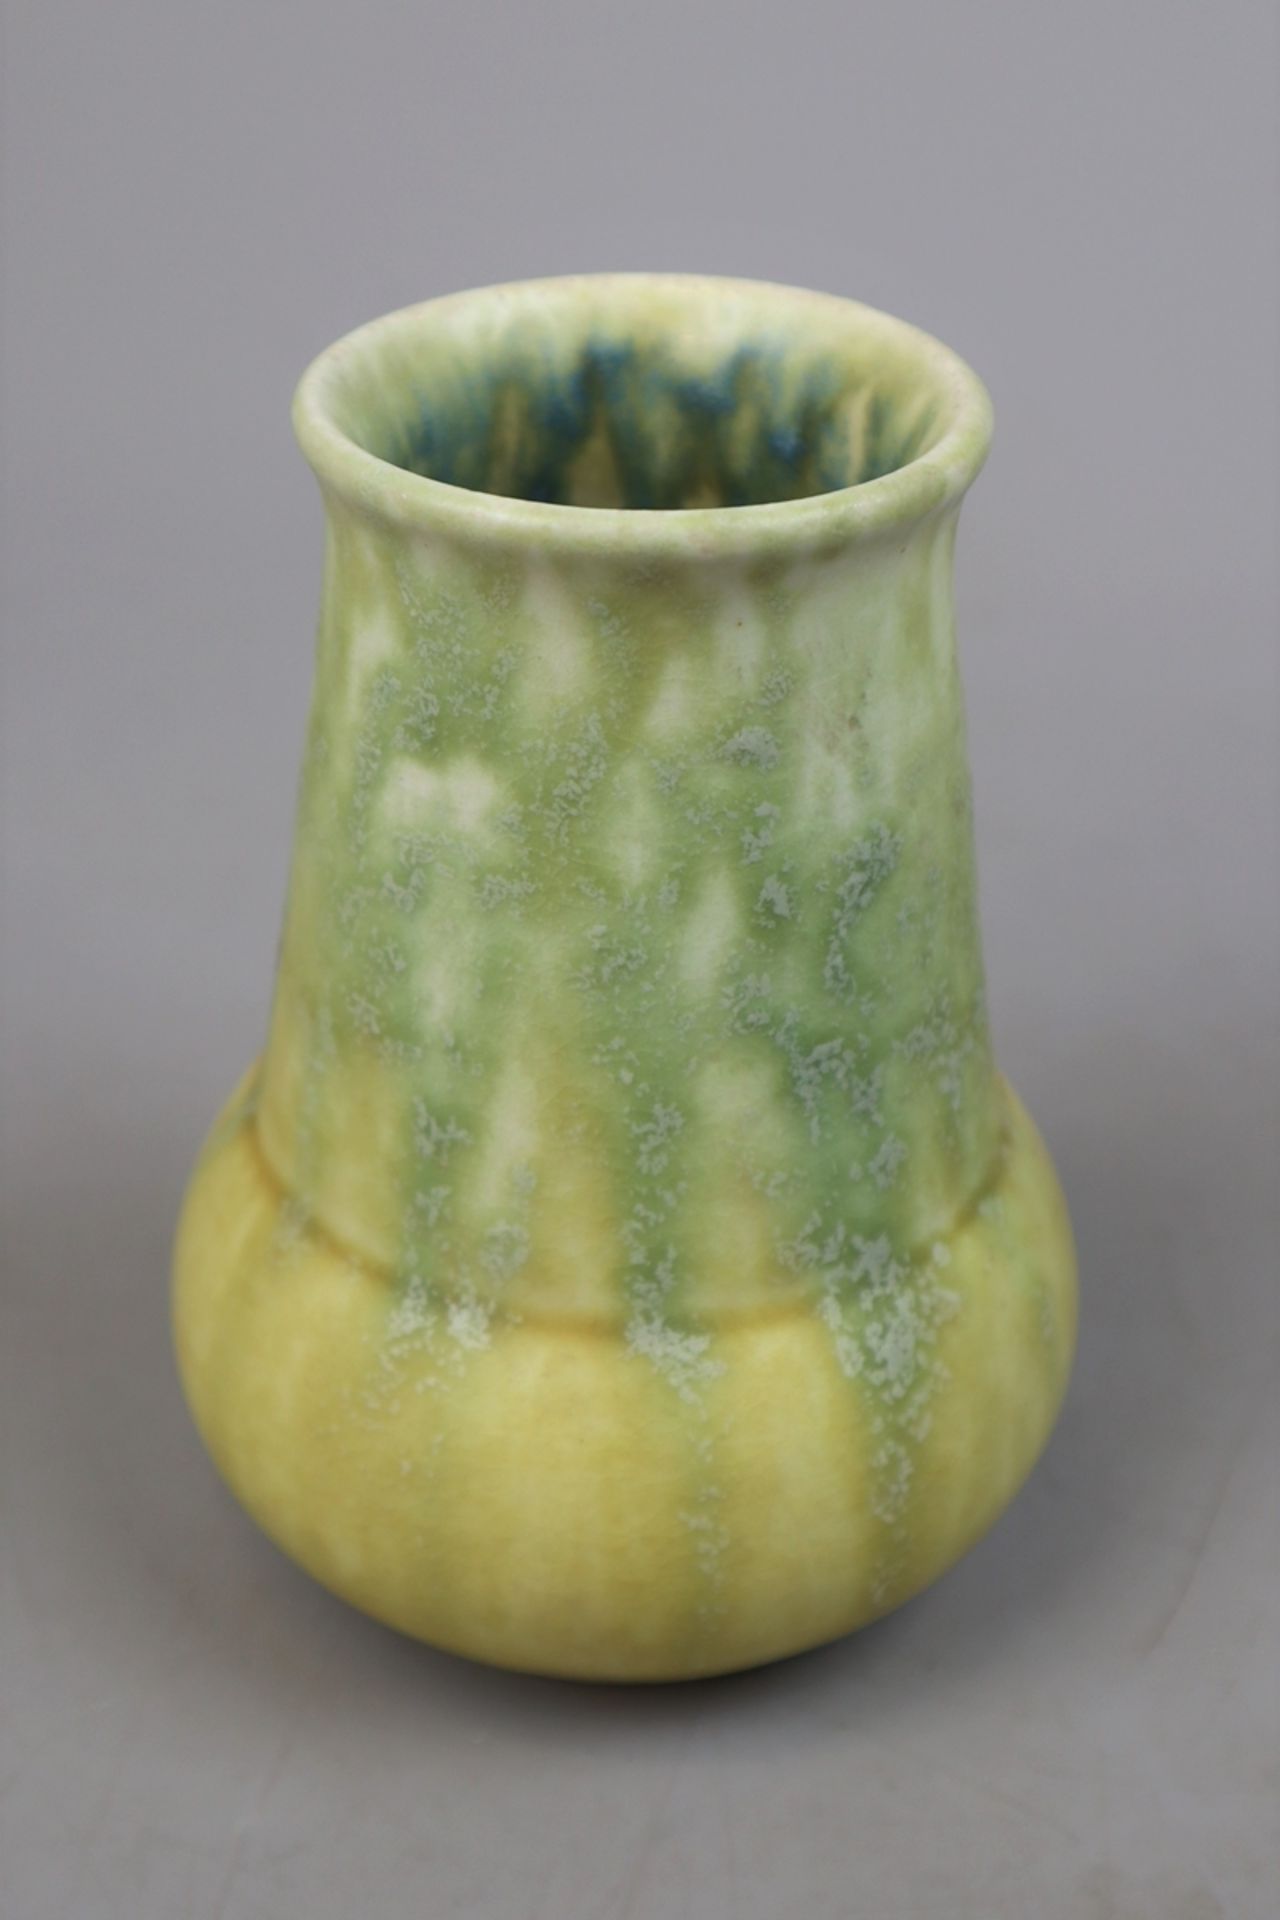 Ruskin vase - Approx height 12cm